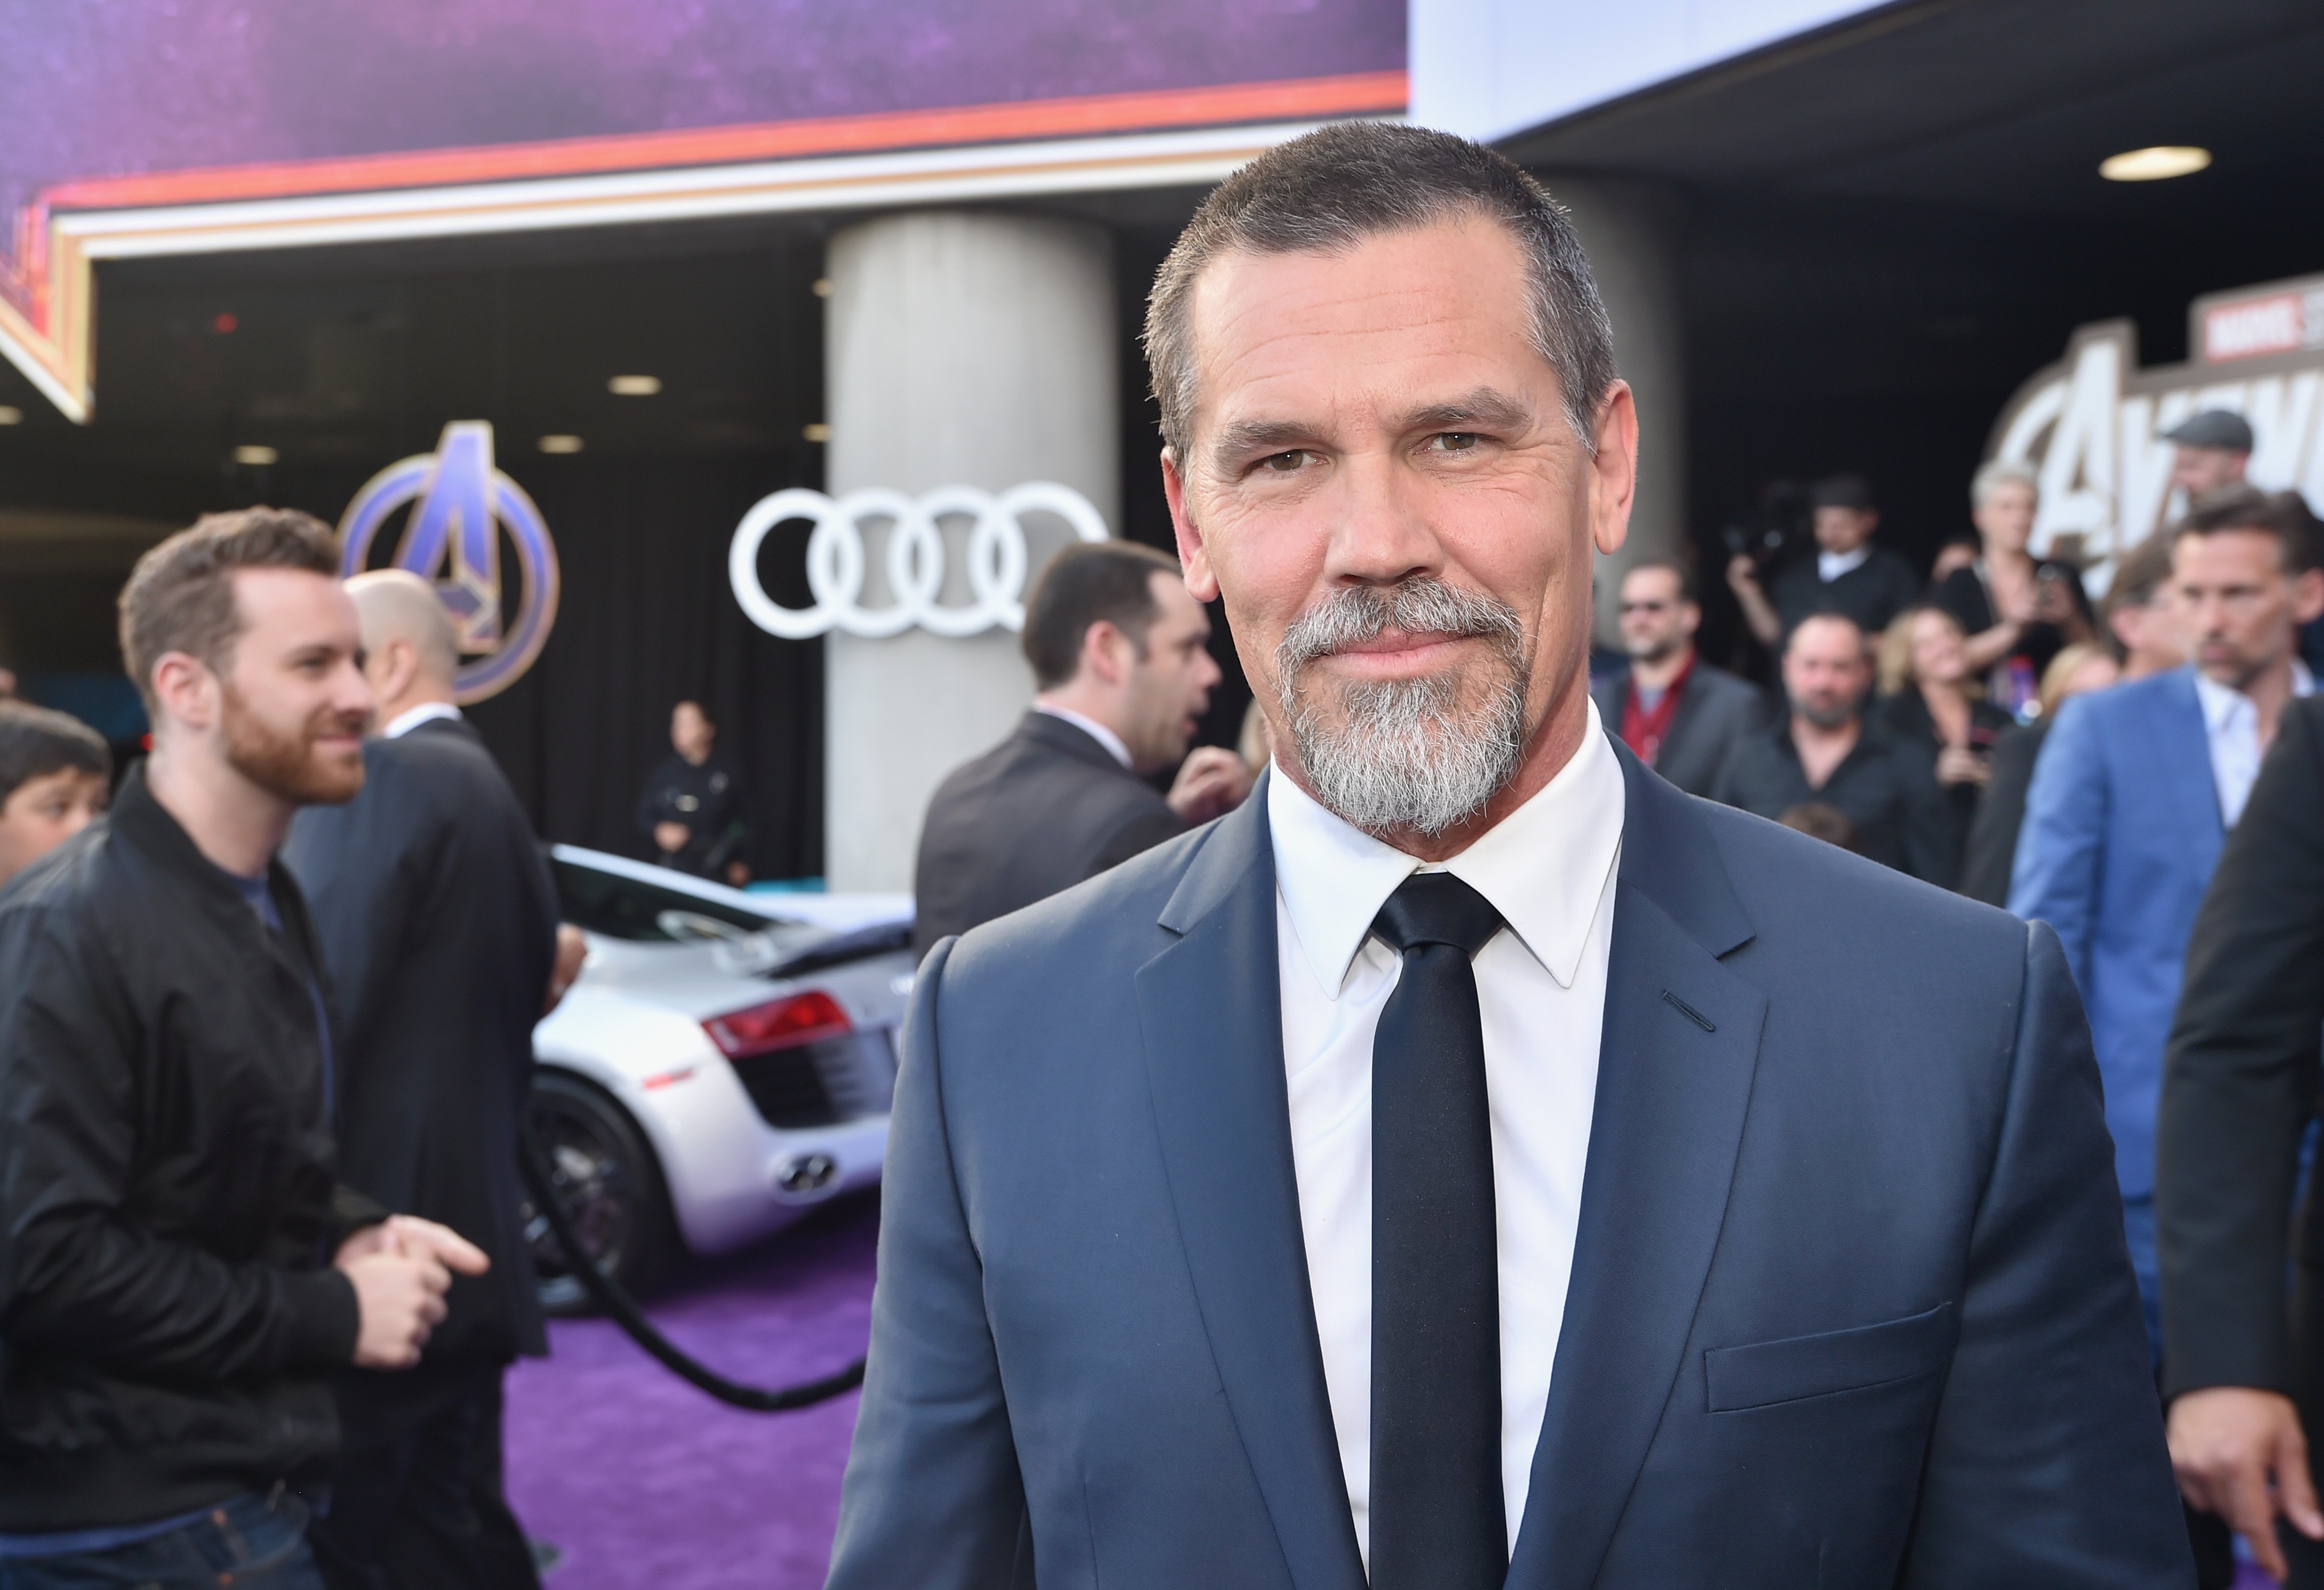 Josh Brolin, who almost played Chris Pratt's role in Jurassic World, attends the premiere of his movie, Avengers: Endgame